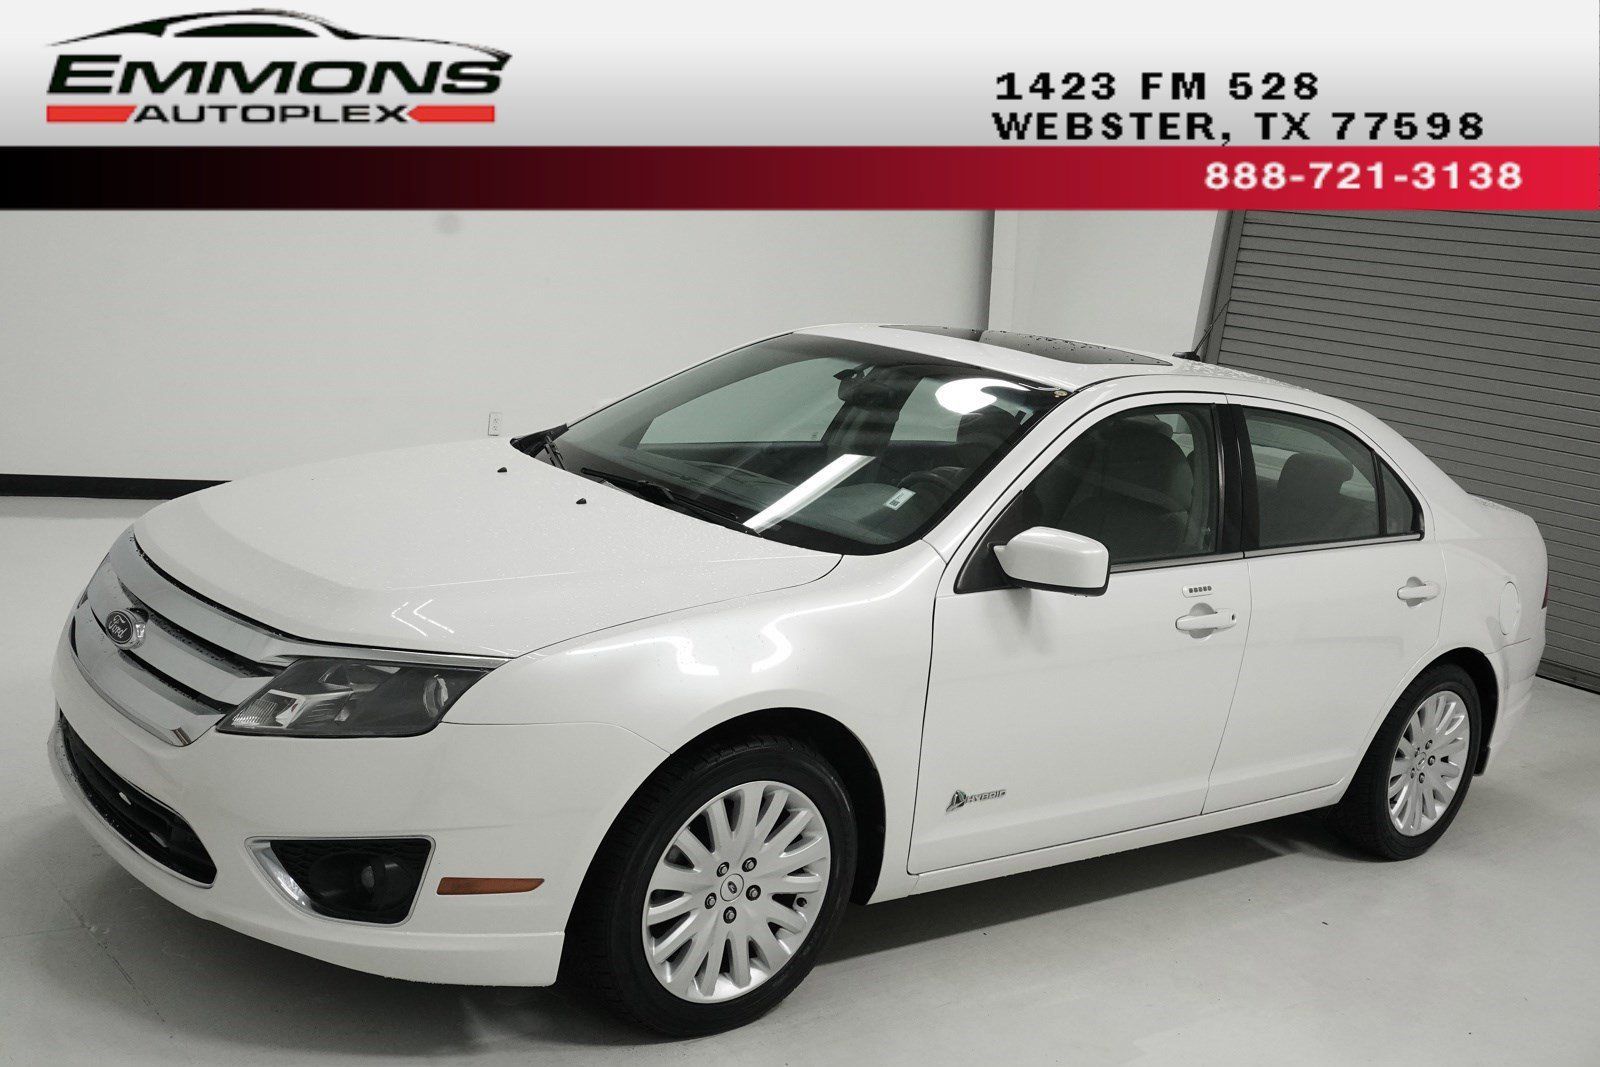 Used 2010 Ford Fusion